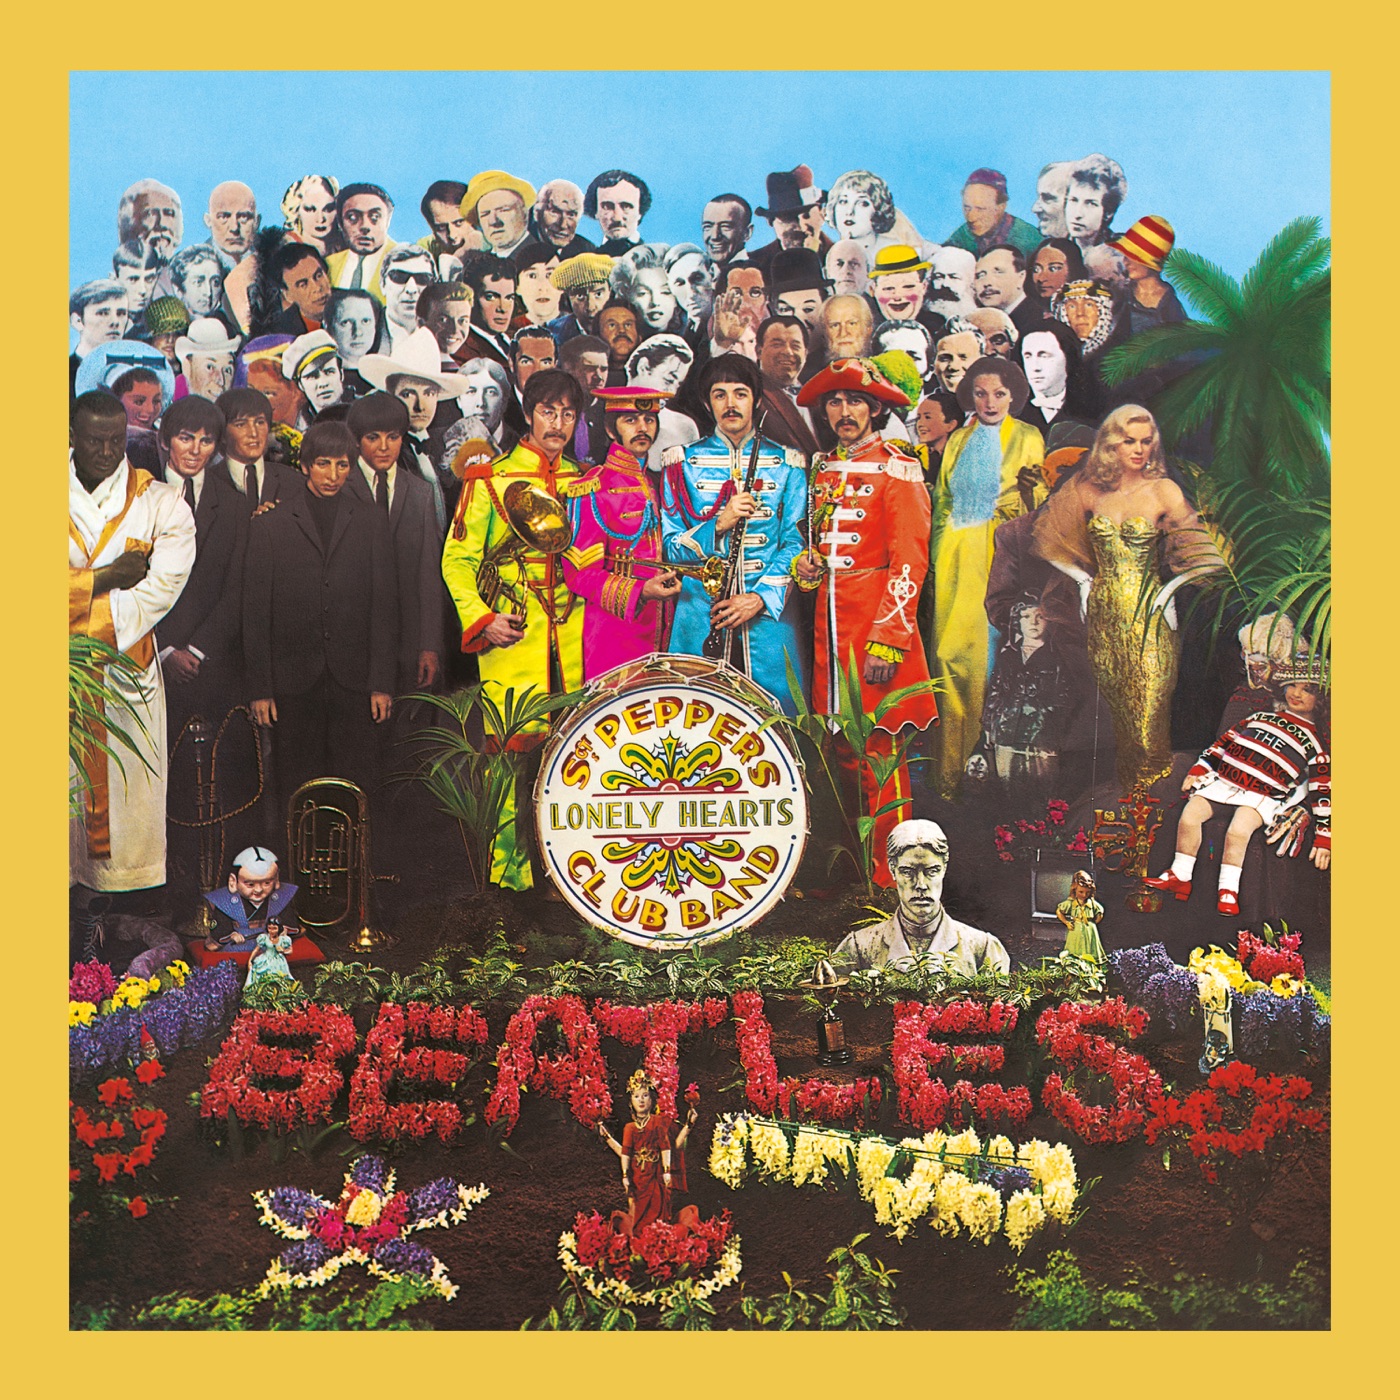 Sgt. Pepper's Lonely Hearts Club Band by The Beatles